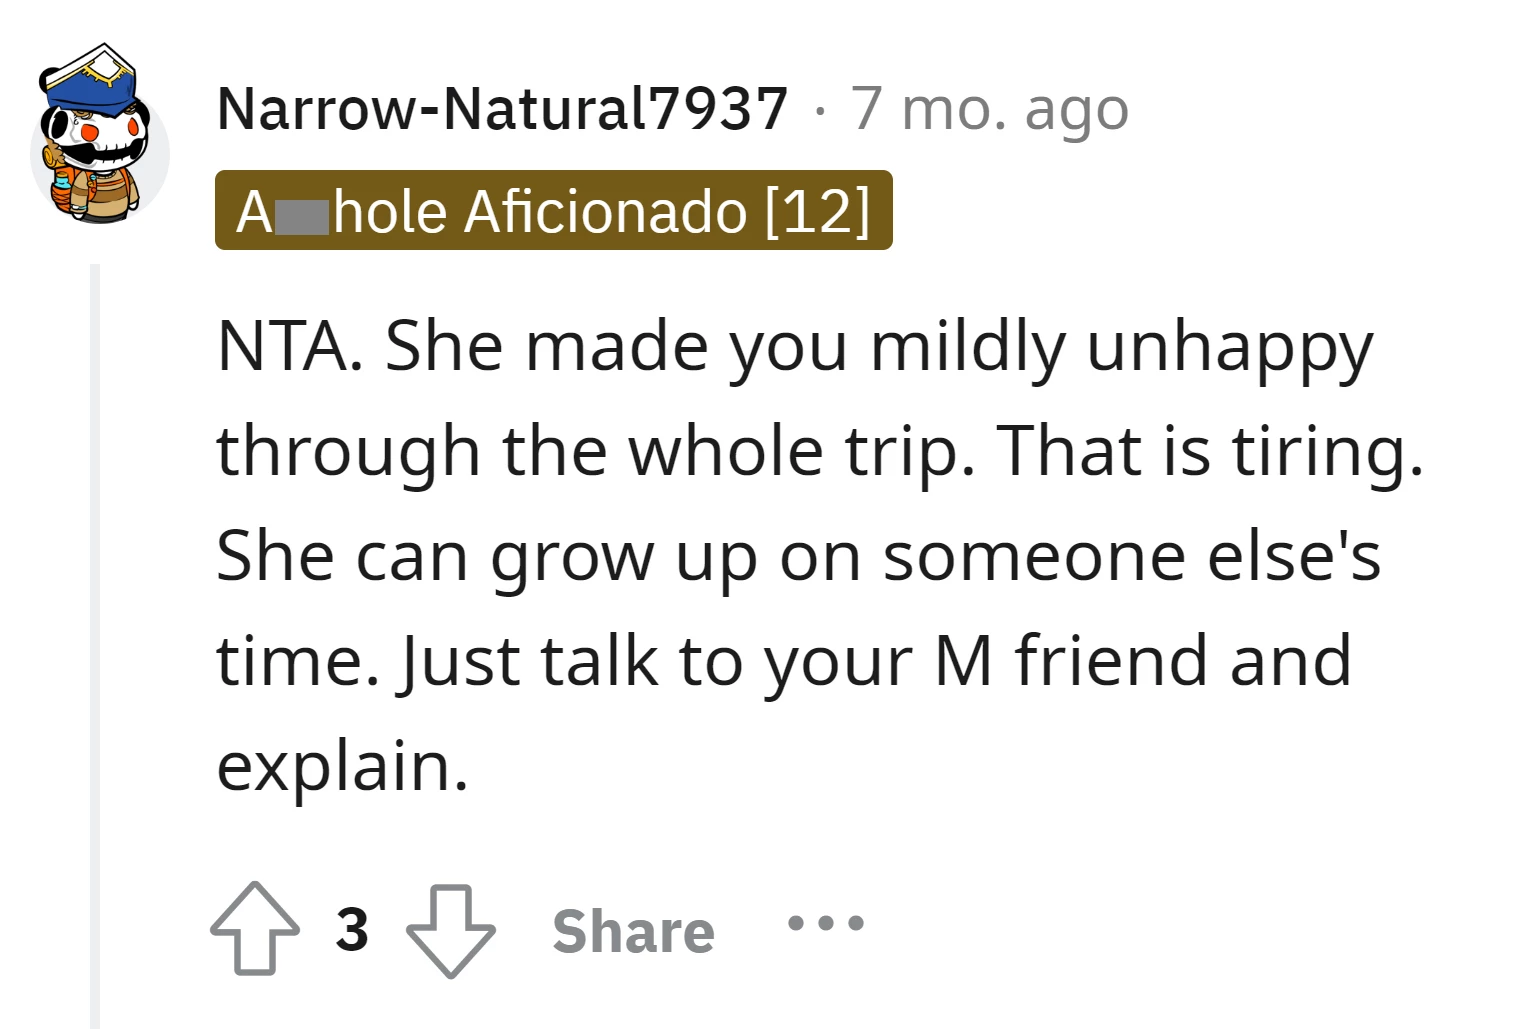 Narrow-Natural7937's comment